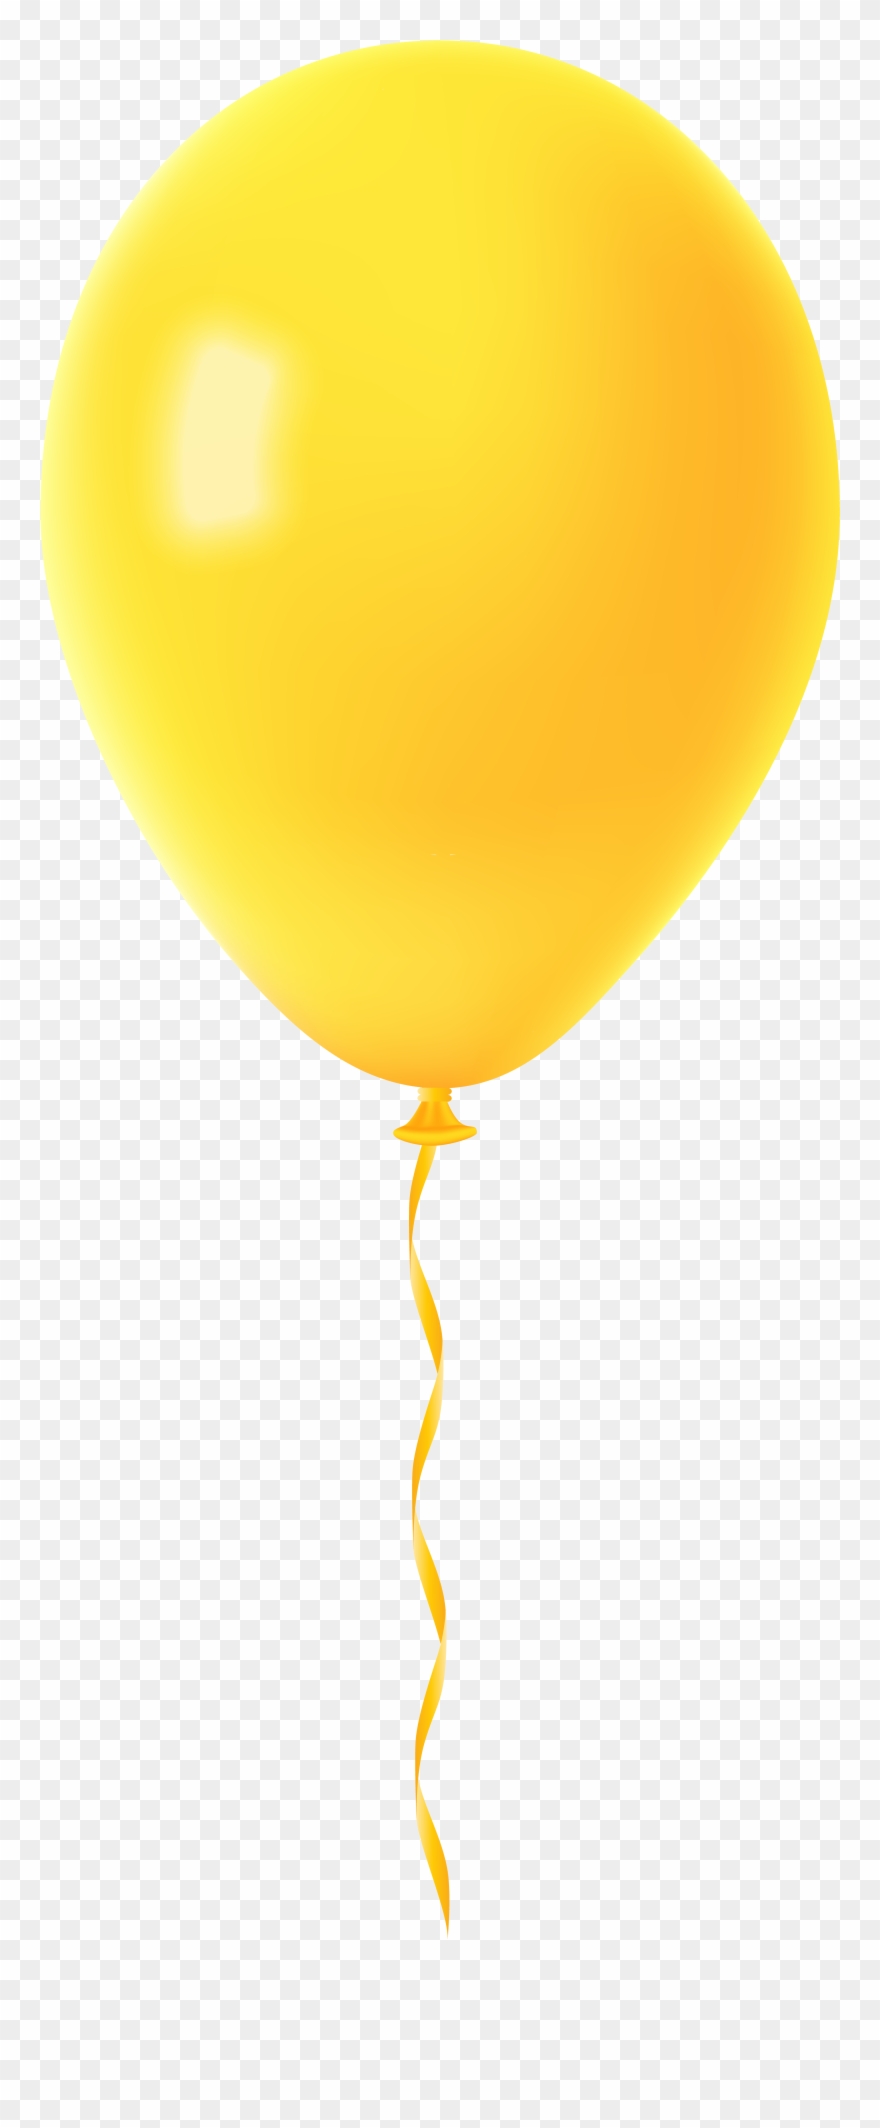 Clipart Black And White Balloon Transparent Png Clip.